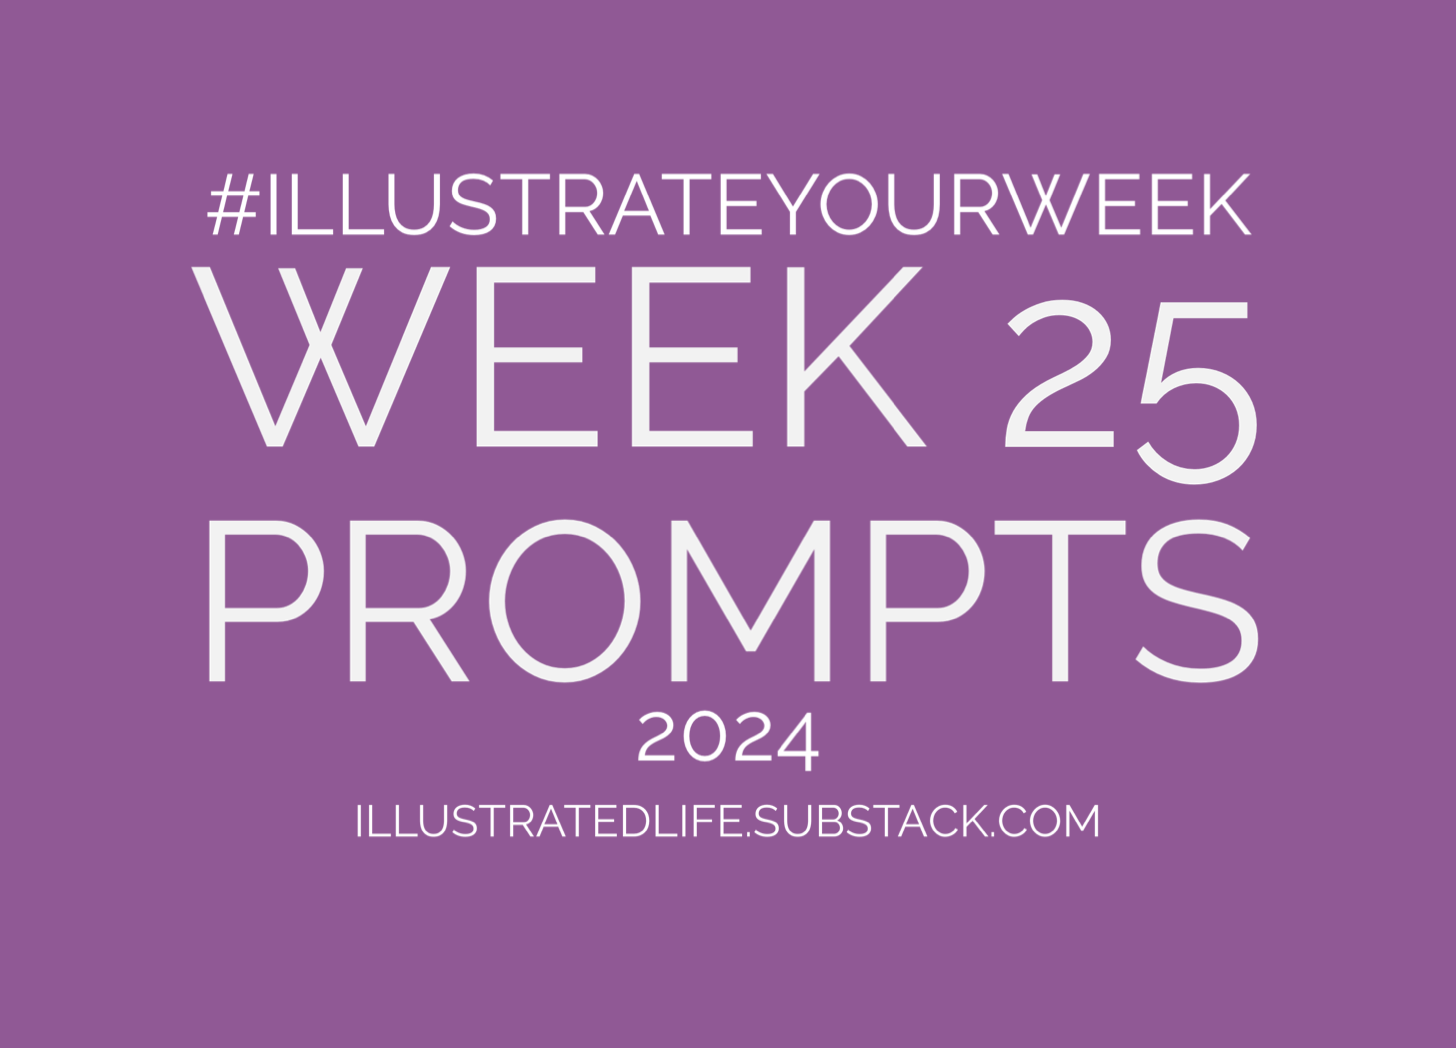 Week 25 Prompts for Illustrate Your Week 2024